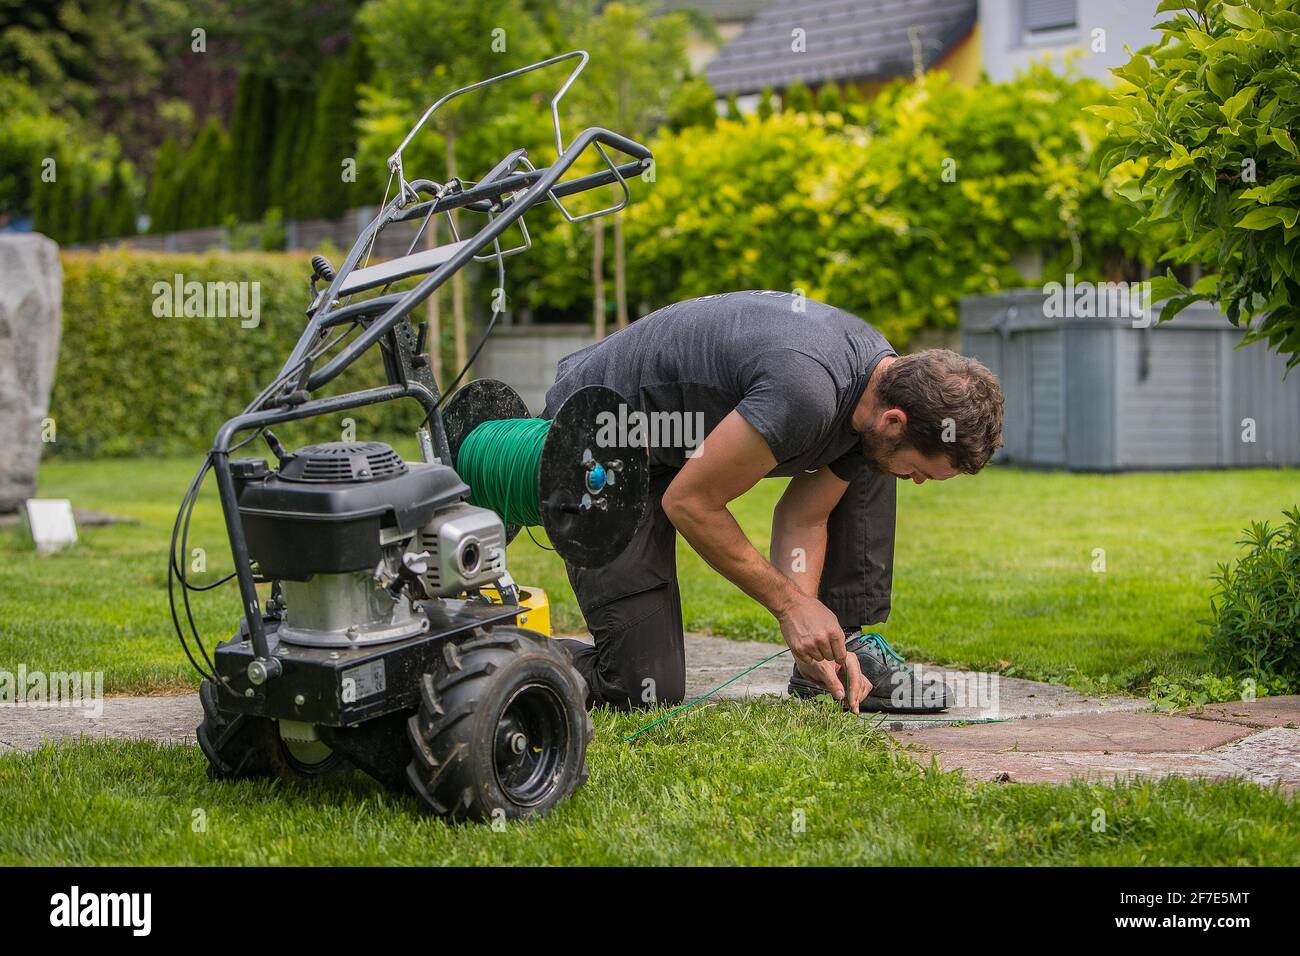 https://c8.alamy.com/comp/2F7E5MT/cable-laying-machine-with-an-operator-used-to-put-down-cables-for-robotic-lawnmowers-inserting-cable-in-the-ground-as-a-guide-cable-for-robotic-lawnm-2F7E5MT.jpg